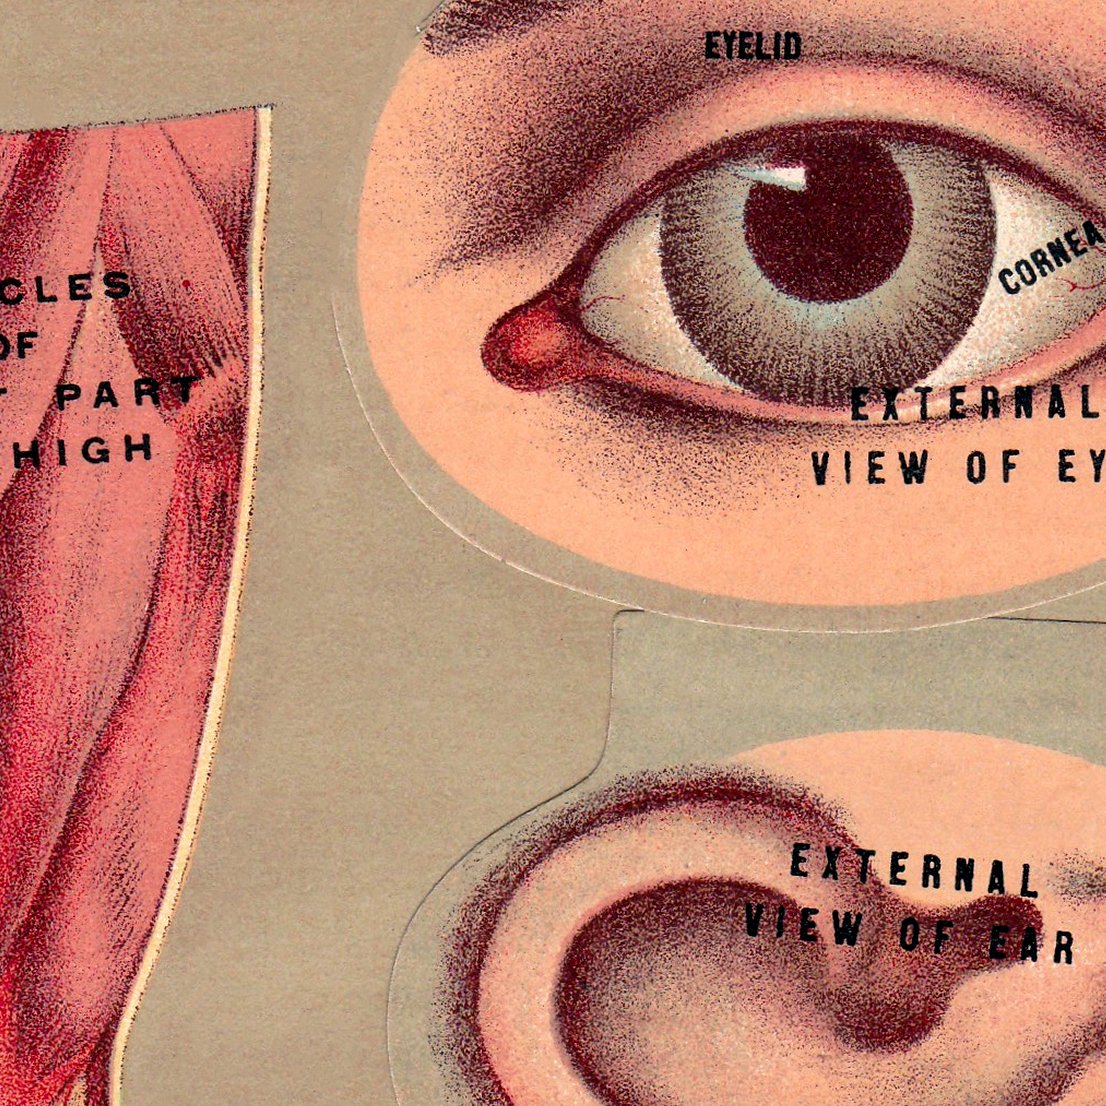 Body Parts Vintage Science Chart